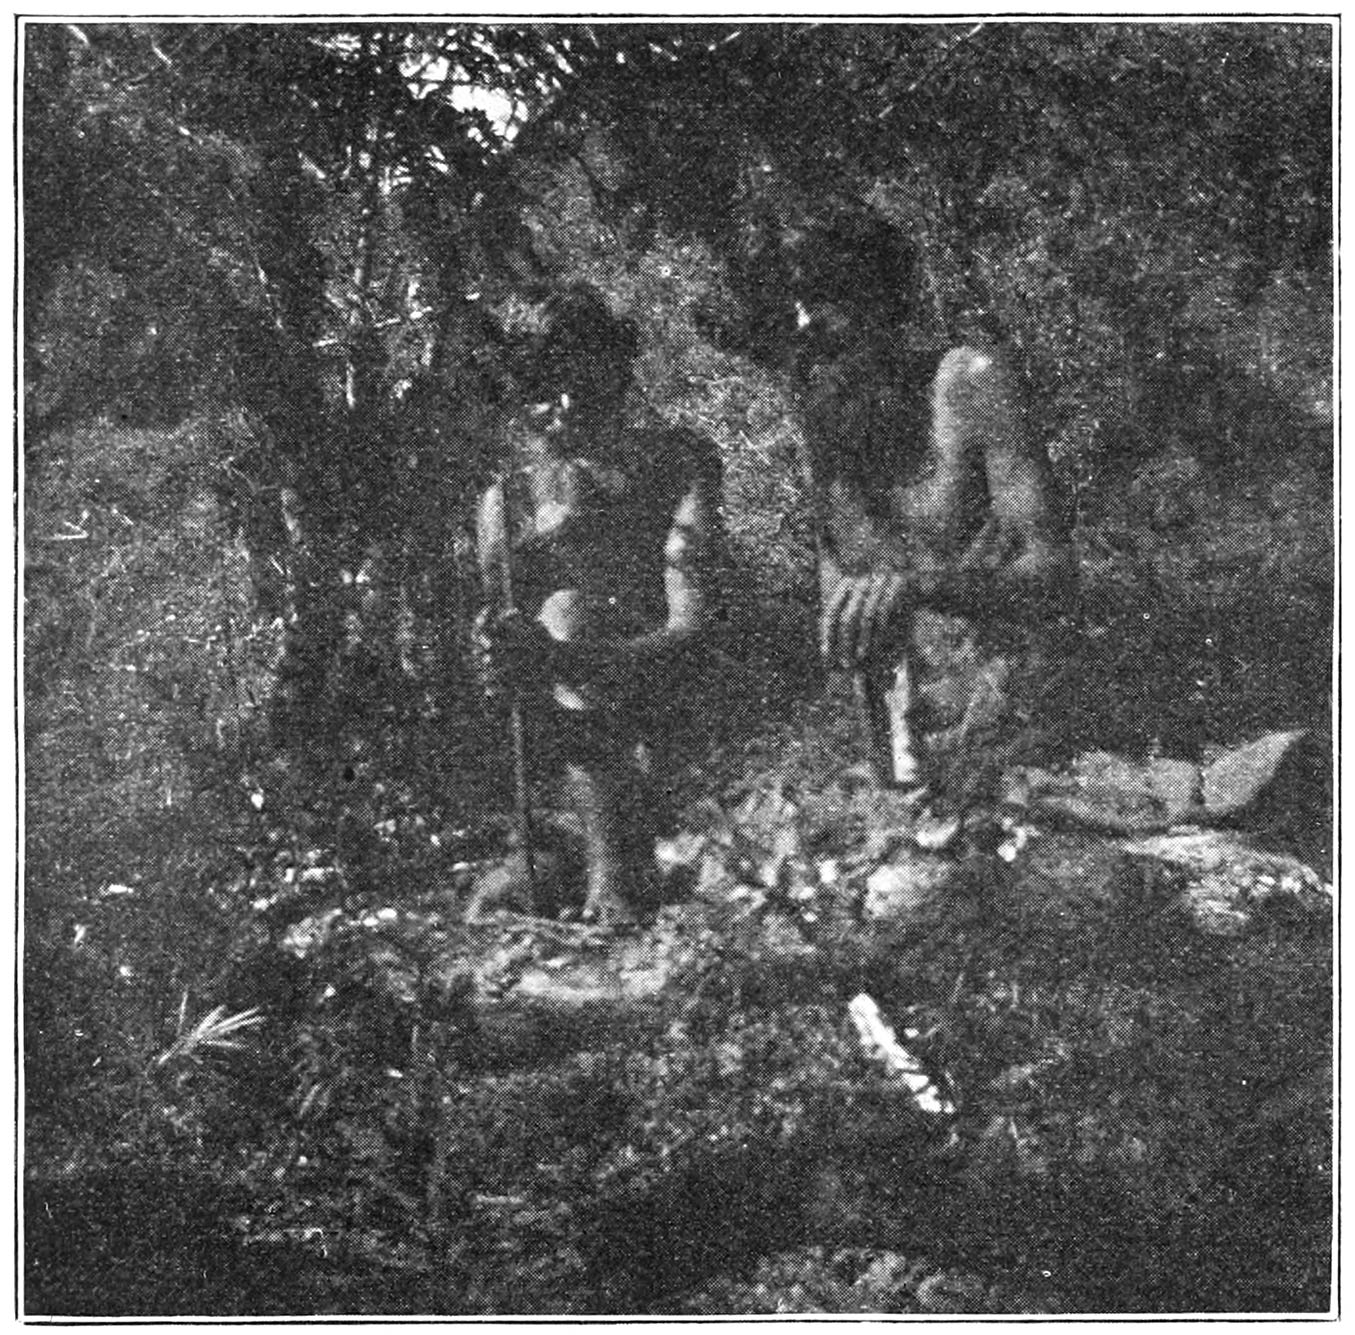 FIG. 37.—PUNATVAN AND PICHIEVAN ATTEMPTING TO MAKE FIRE AT THE ‘ERKUMPTTHPIMI’ CEREMONY.This and the succeeding photographs were taken in a badly lighted wood, and represent the actual ceremony.